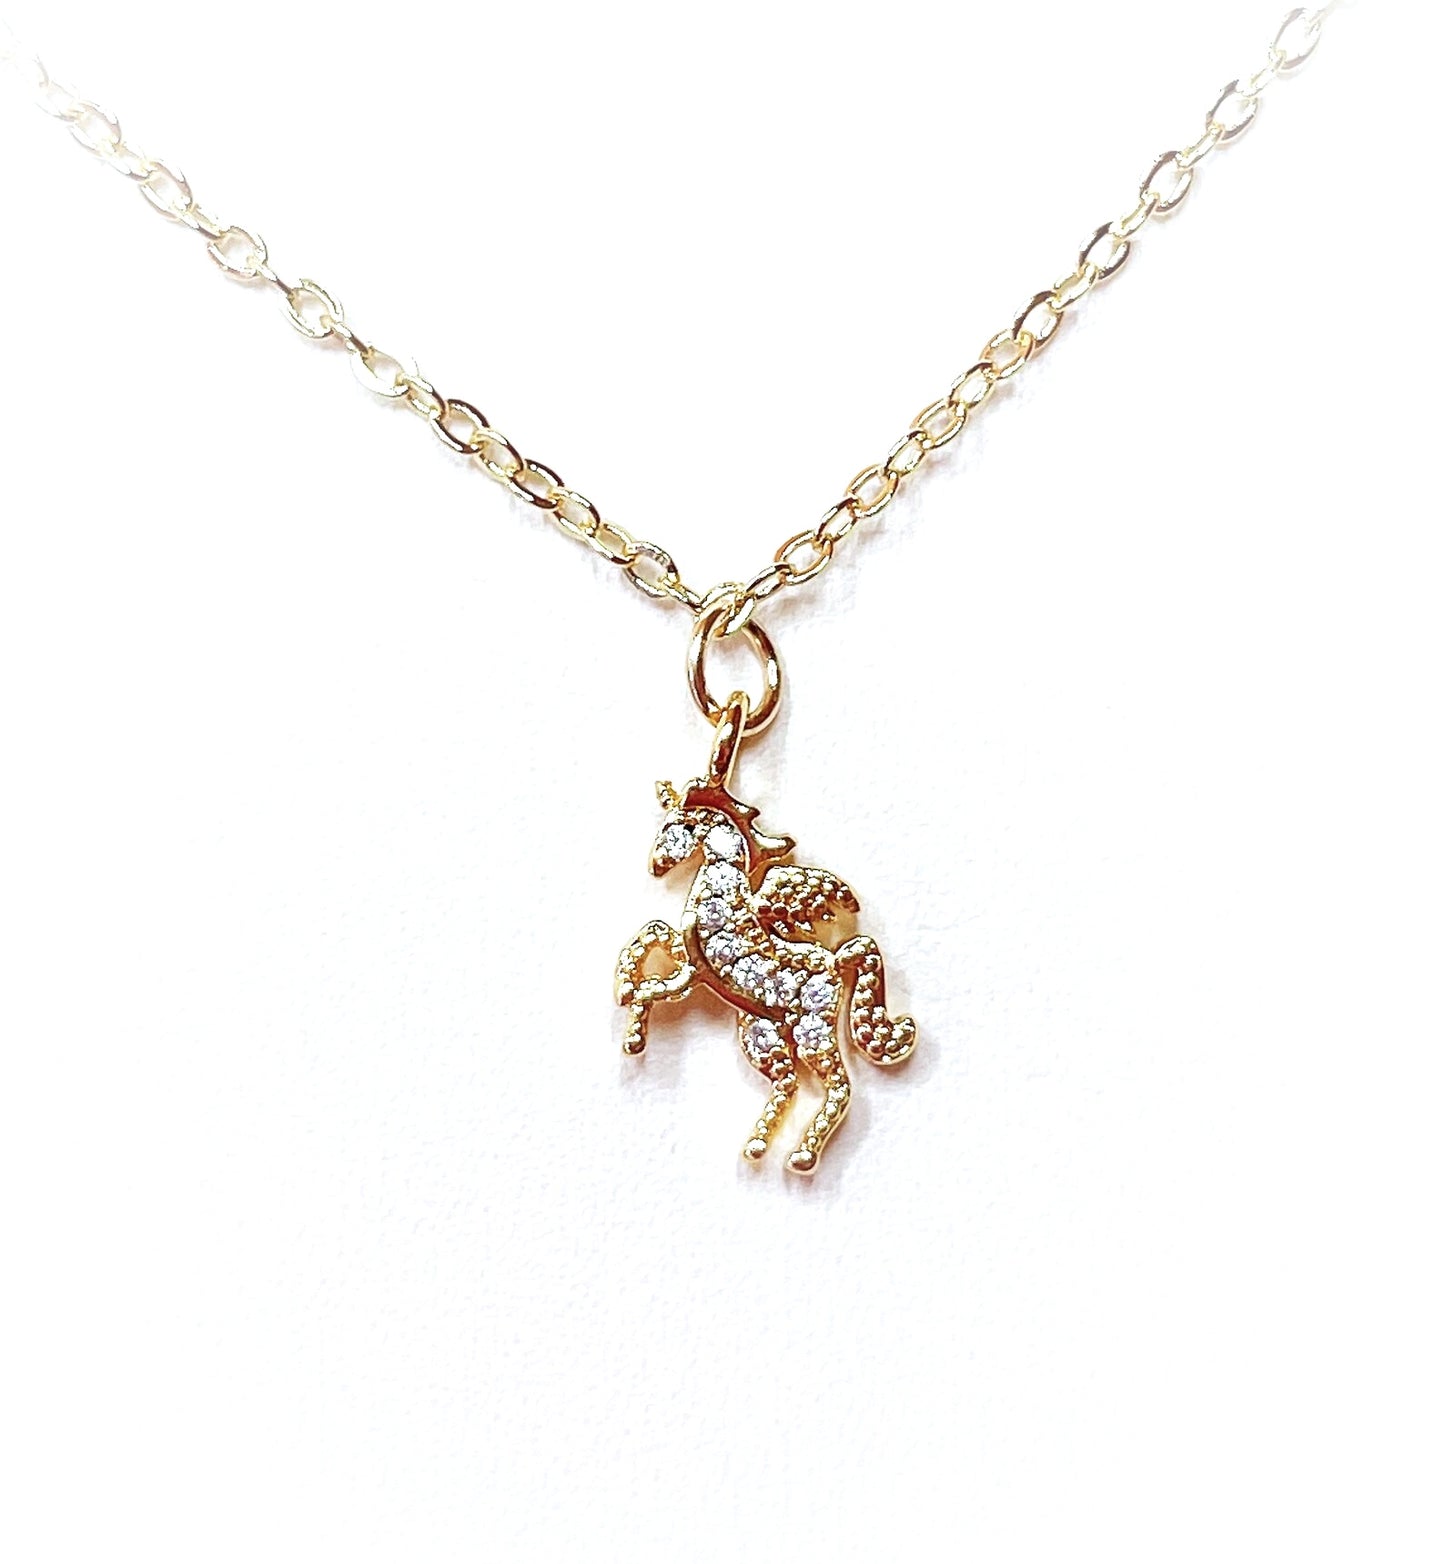 xGold Unicorn Crystal Necklace | Dainty Jewellery | 4kt Gold Filled | Fantasy Lovers Jewelry